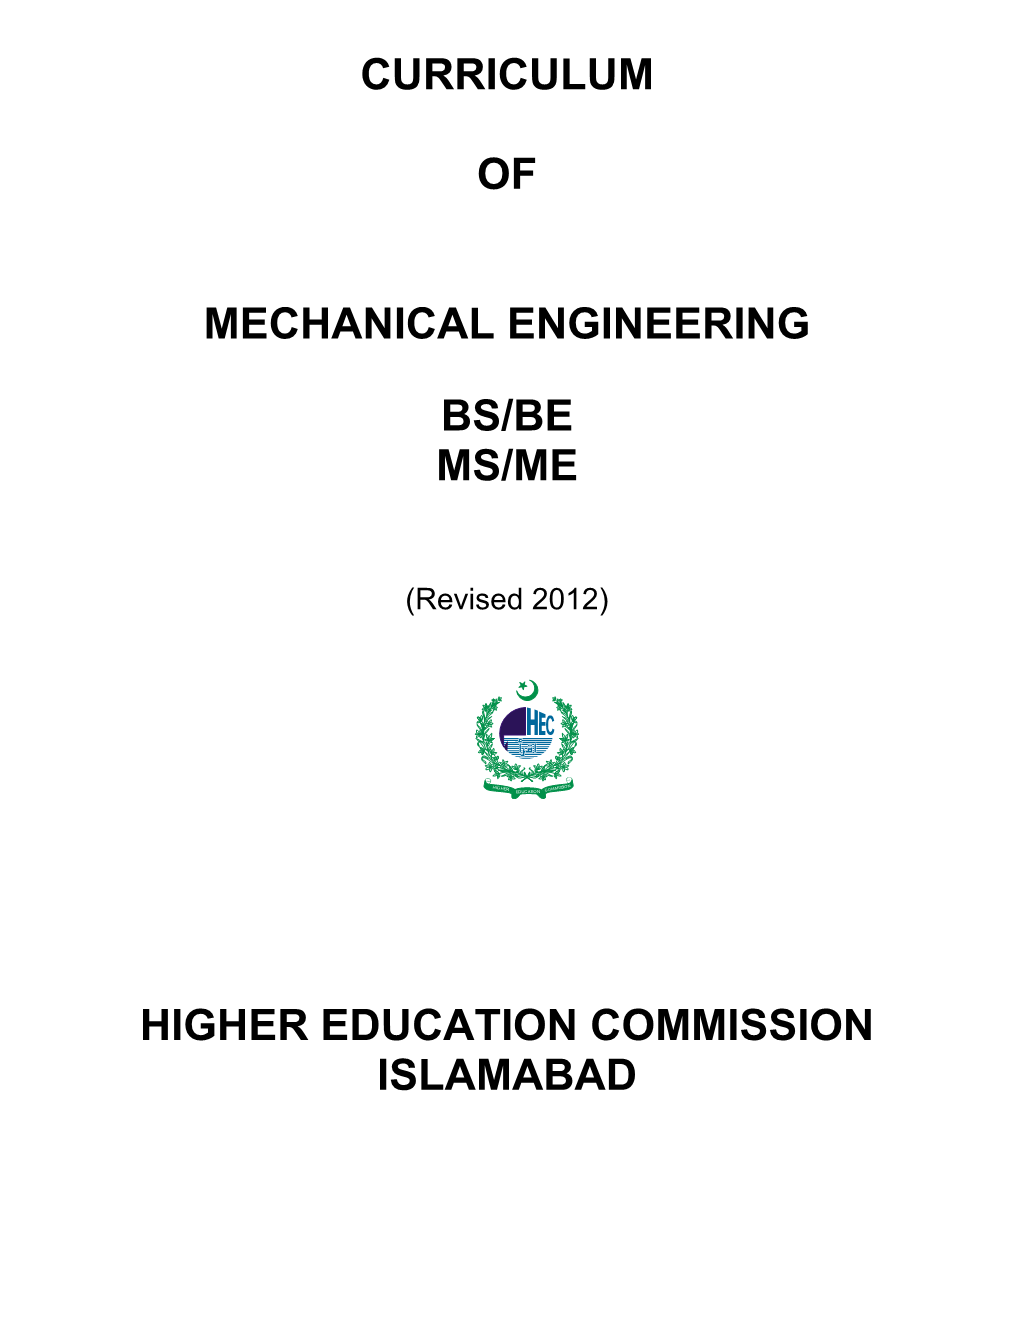 Curriculum of Mechanical Engineering Bs/Be Ms/Me